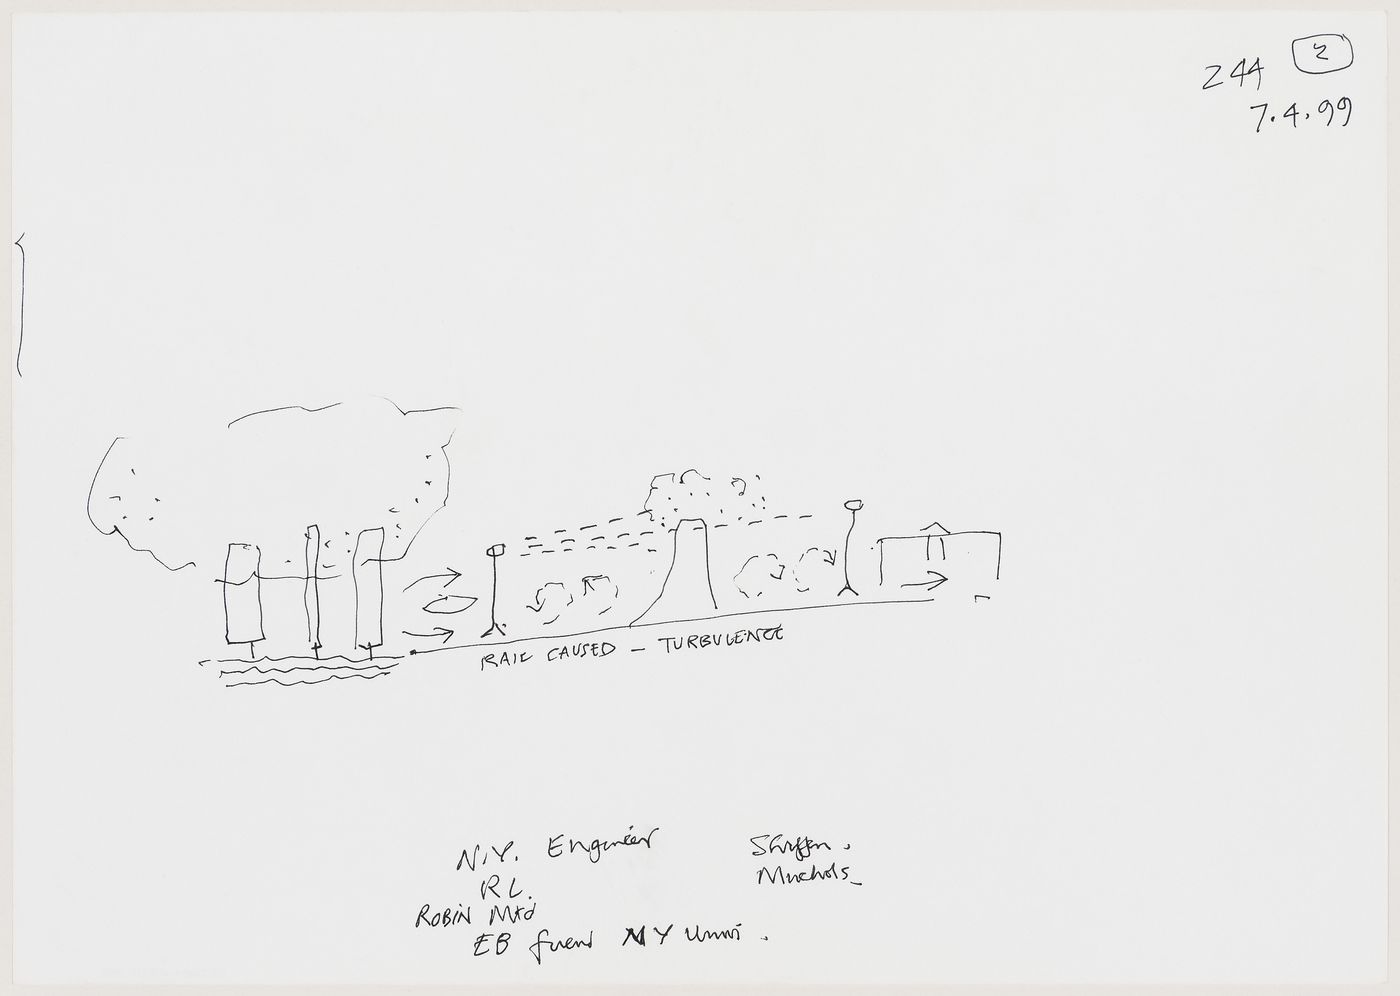 Project by Cedric Price Architects for the IFCCA Prize for the Design of Cities competition: sketch section illustrating "Rail-caused turbulence" (document from the IFPRI project records)